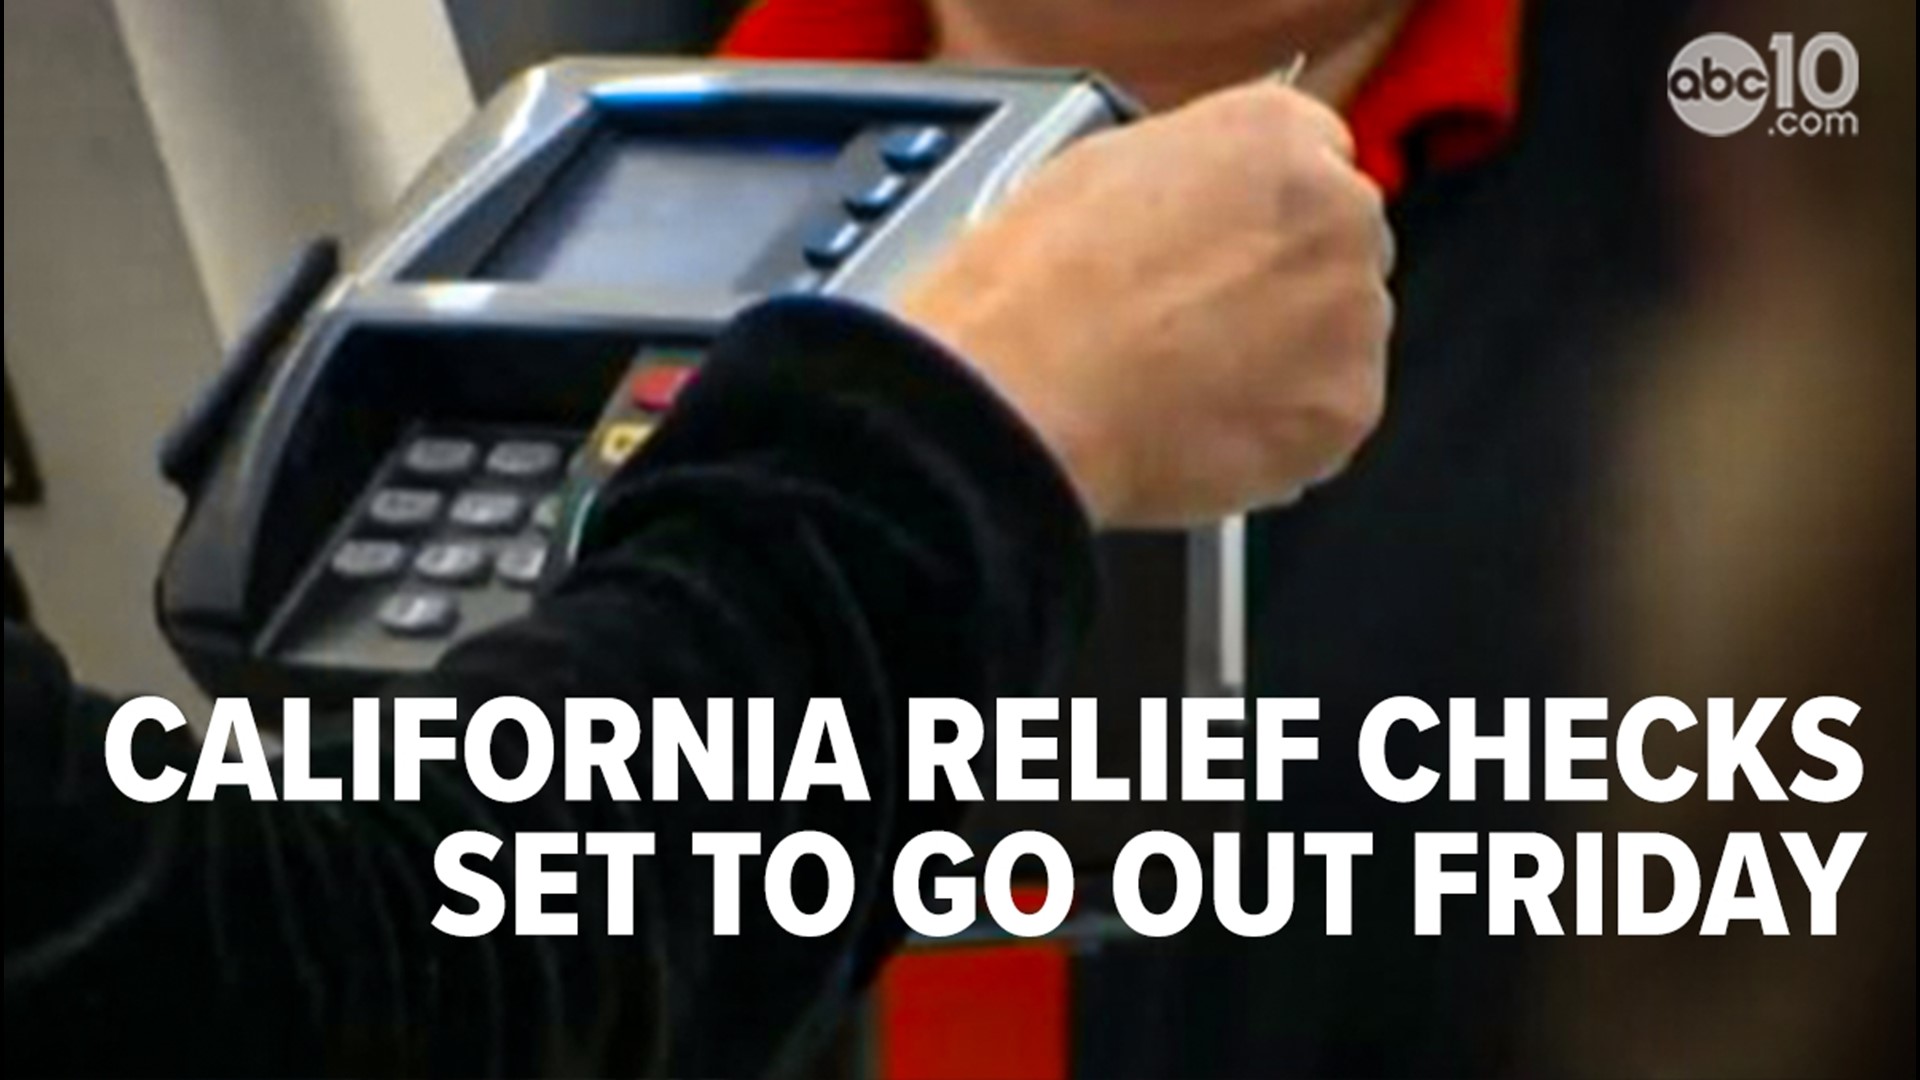 The inflation relief checks will be based on income and are set to go out as early as Friday, but negotiations between lawmakers and Newsom delayed the checks.